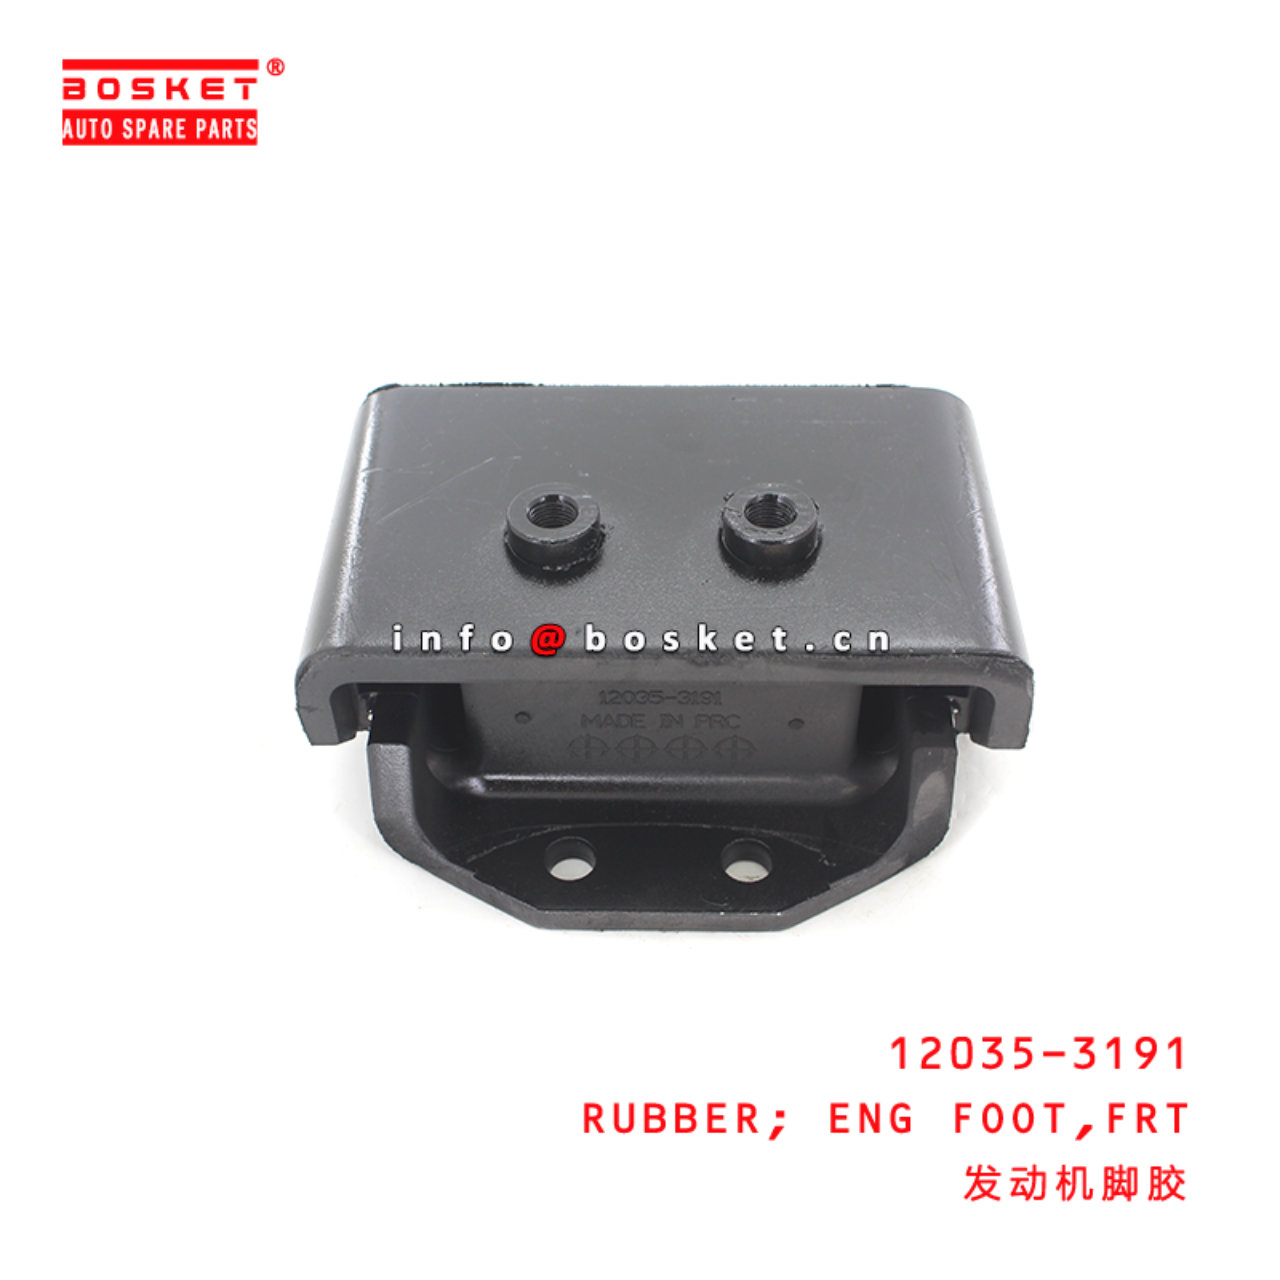 12035-3191 Front Engine Foot Rubber Suitable for ISUZU HINO 700